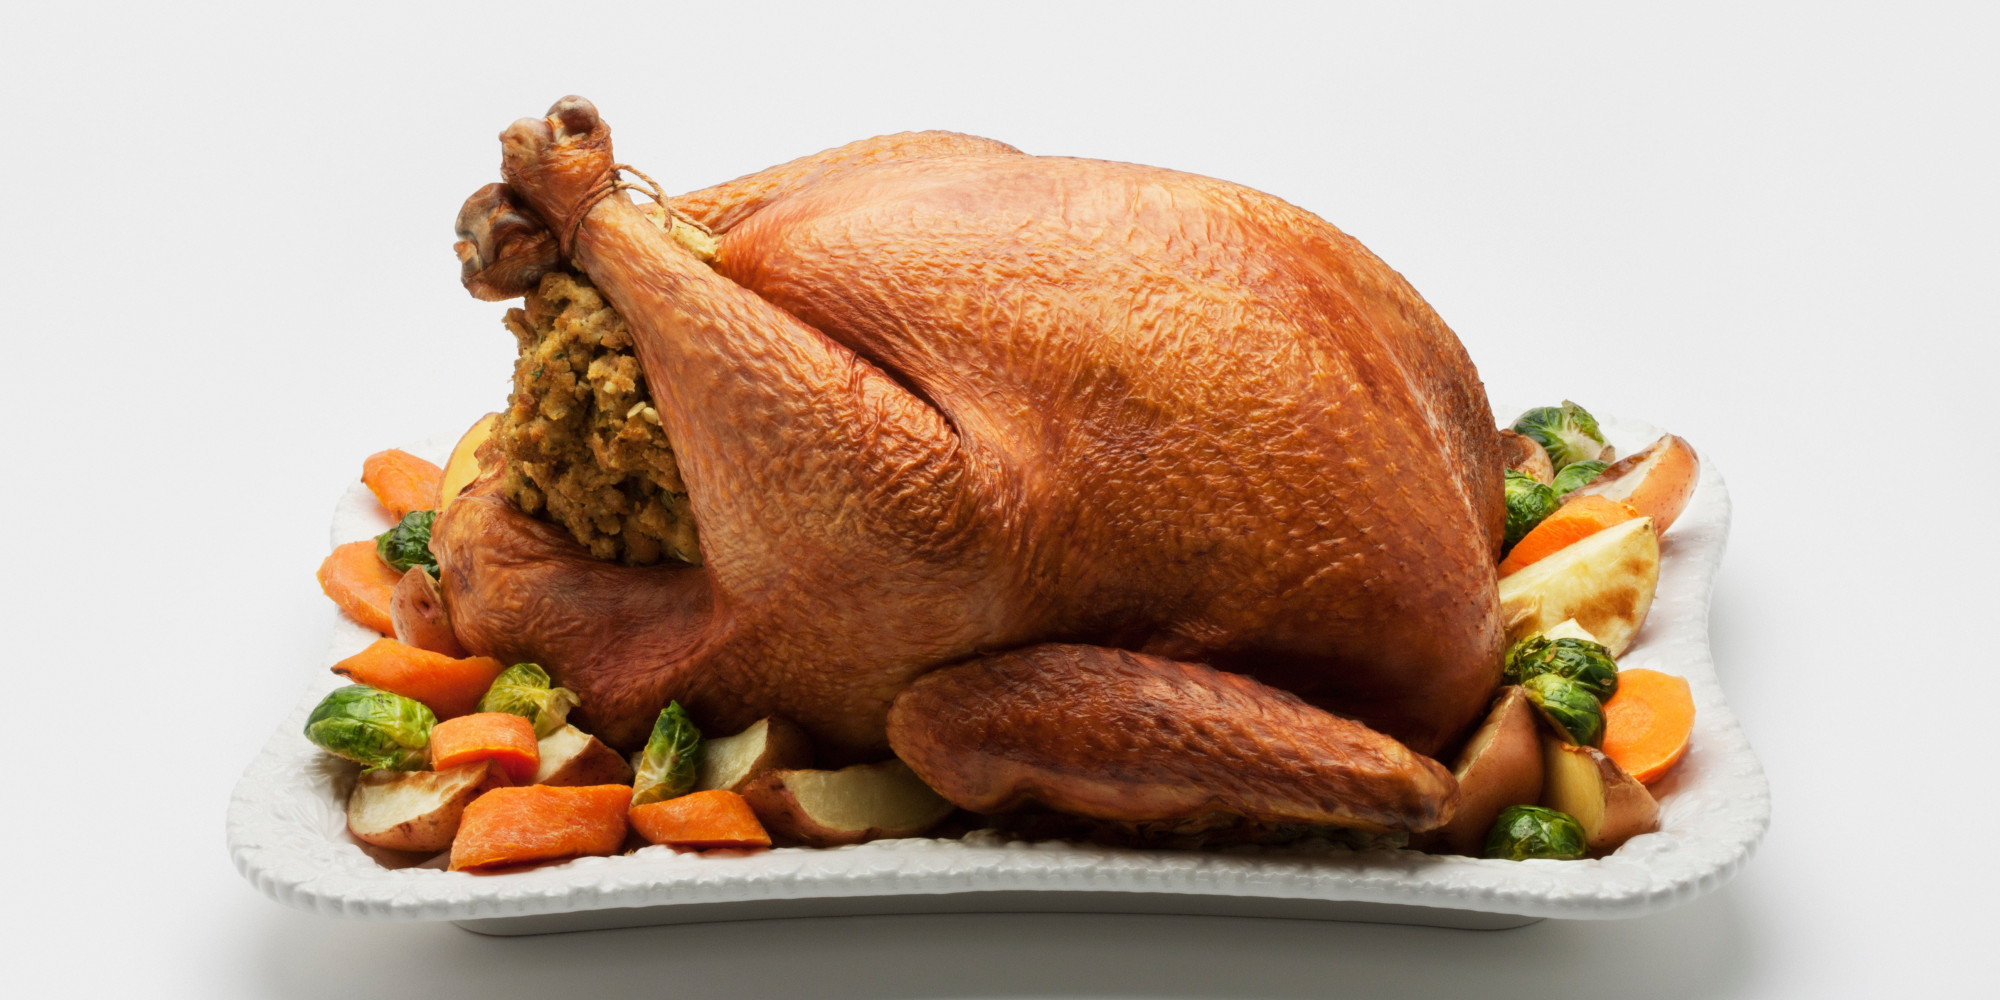 Pictures Of Turkey For Thanksgiving
 Tryptophan Making You Sleepy Is A Big Fat Lie